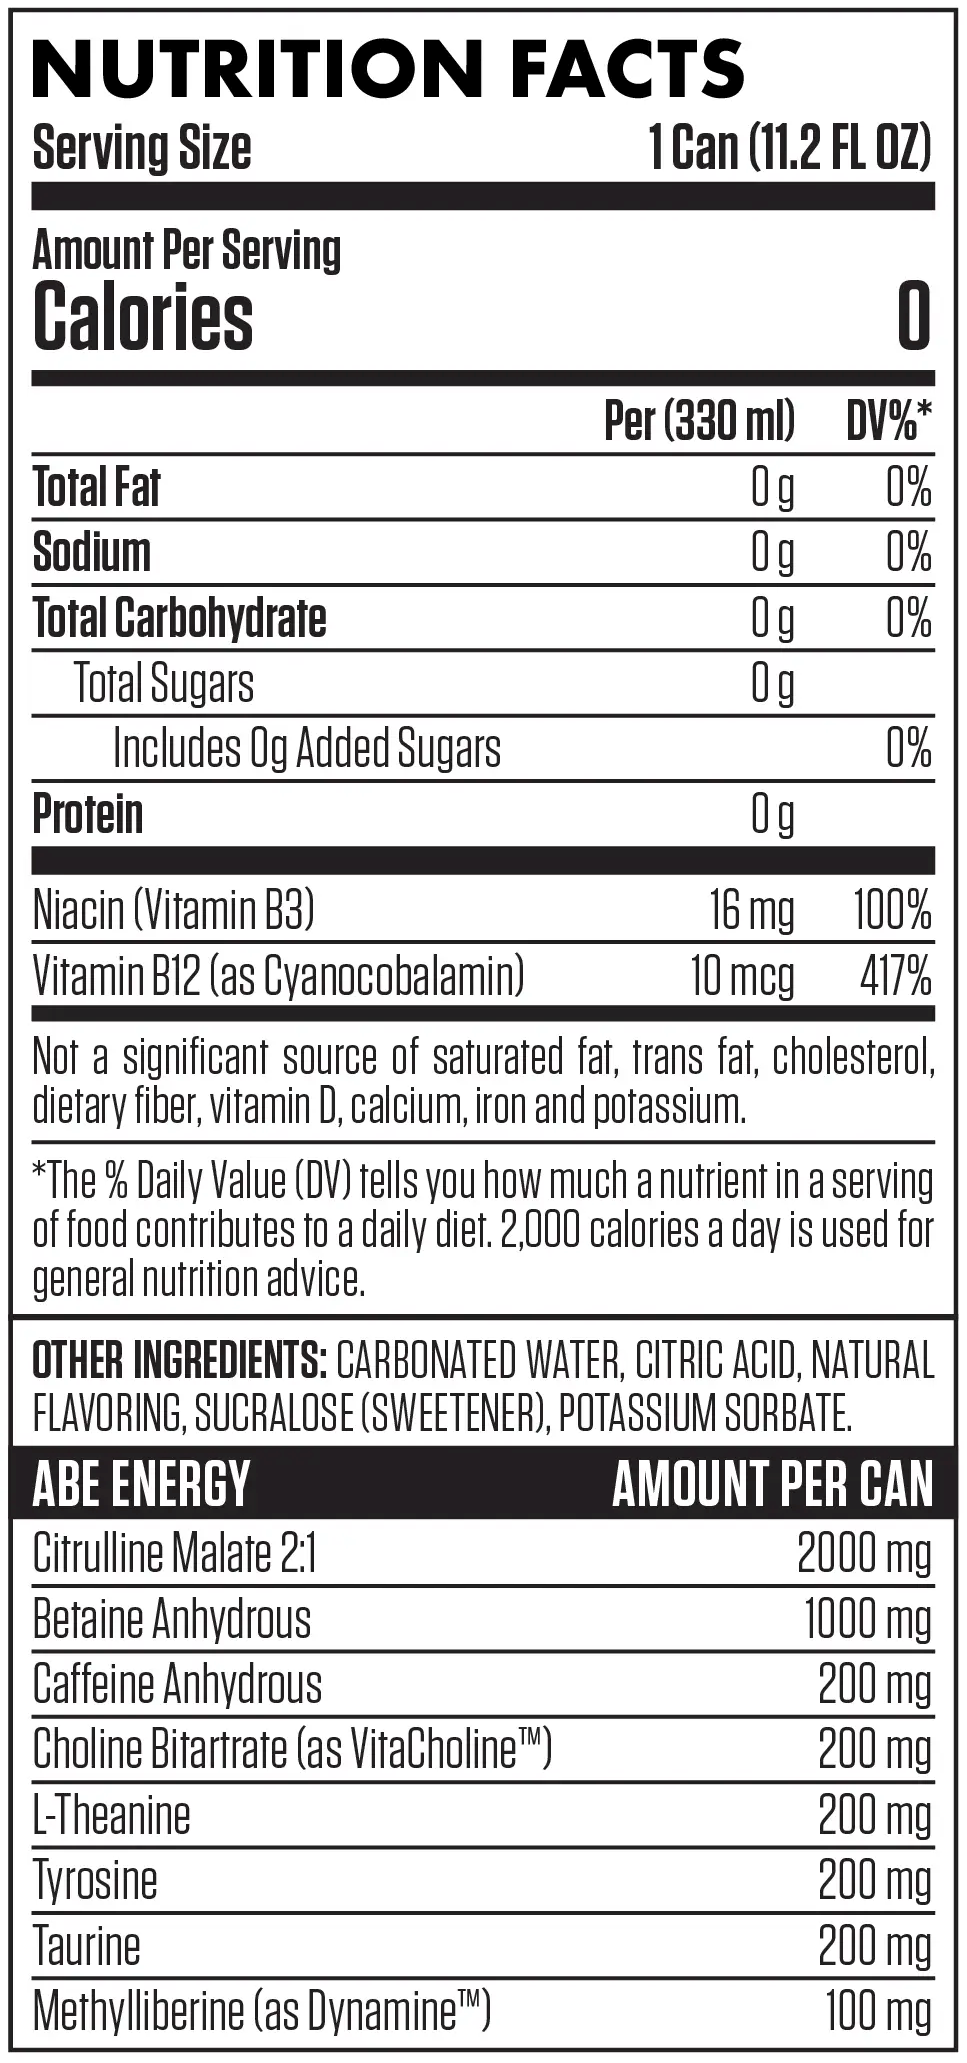 Nutrition facts for a 330ml energy drink, including zero fat, sugars, and sodium. Contains 16mg Niacin and 10mcg Vitamin B12.